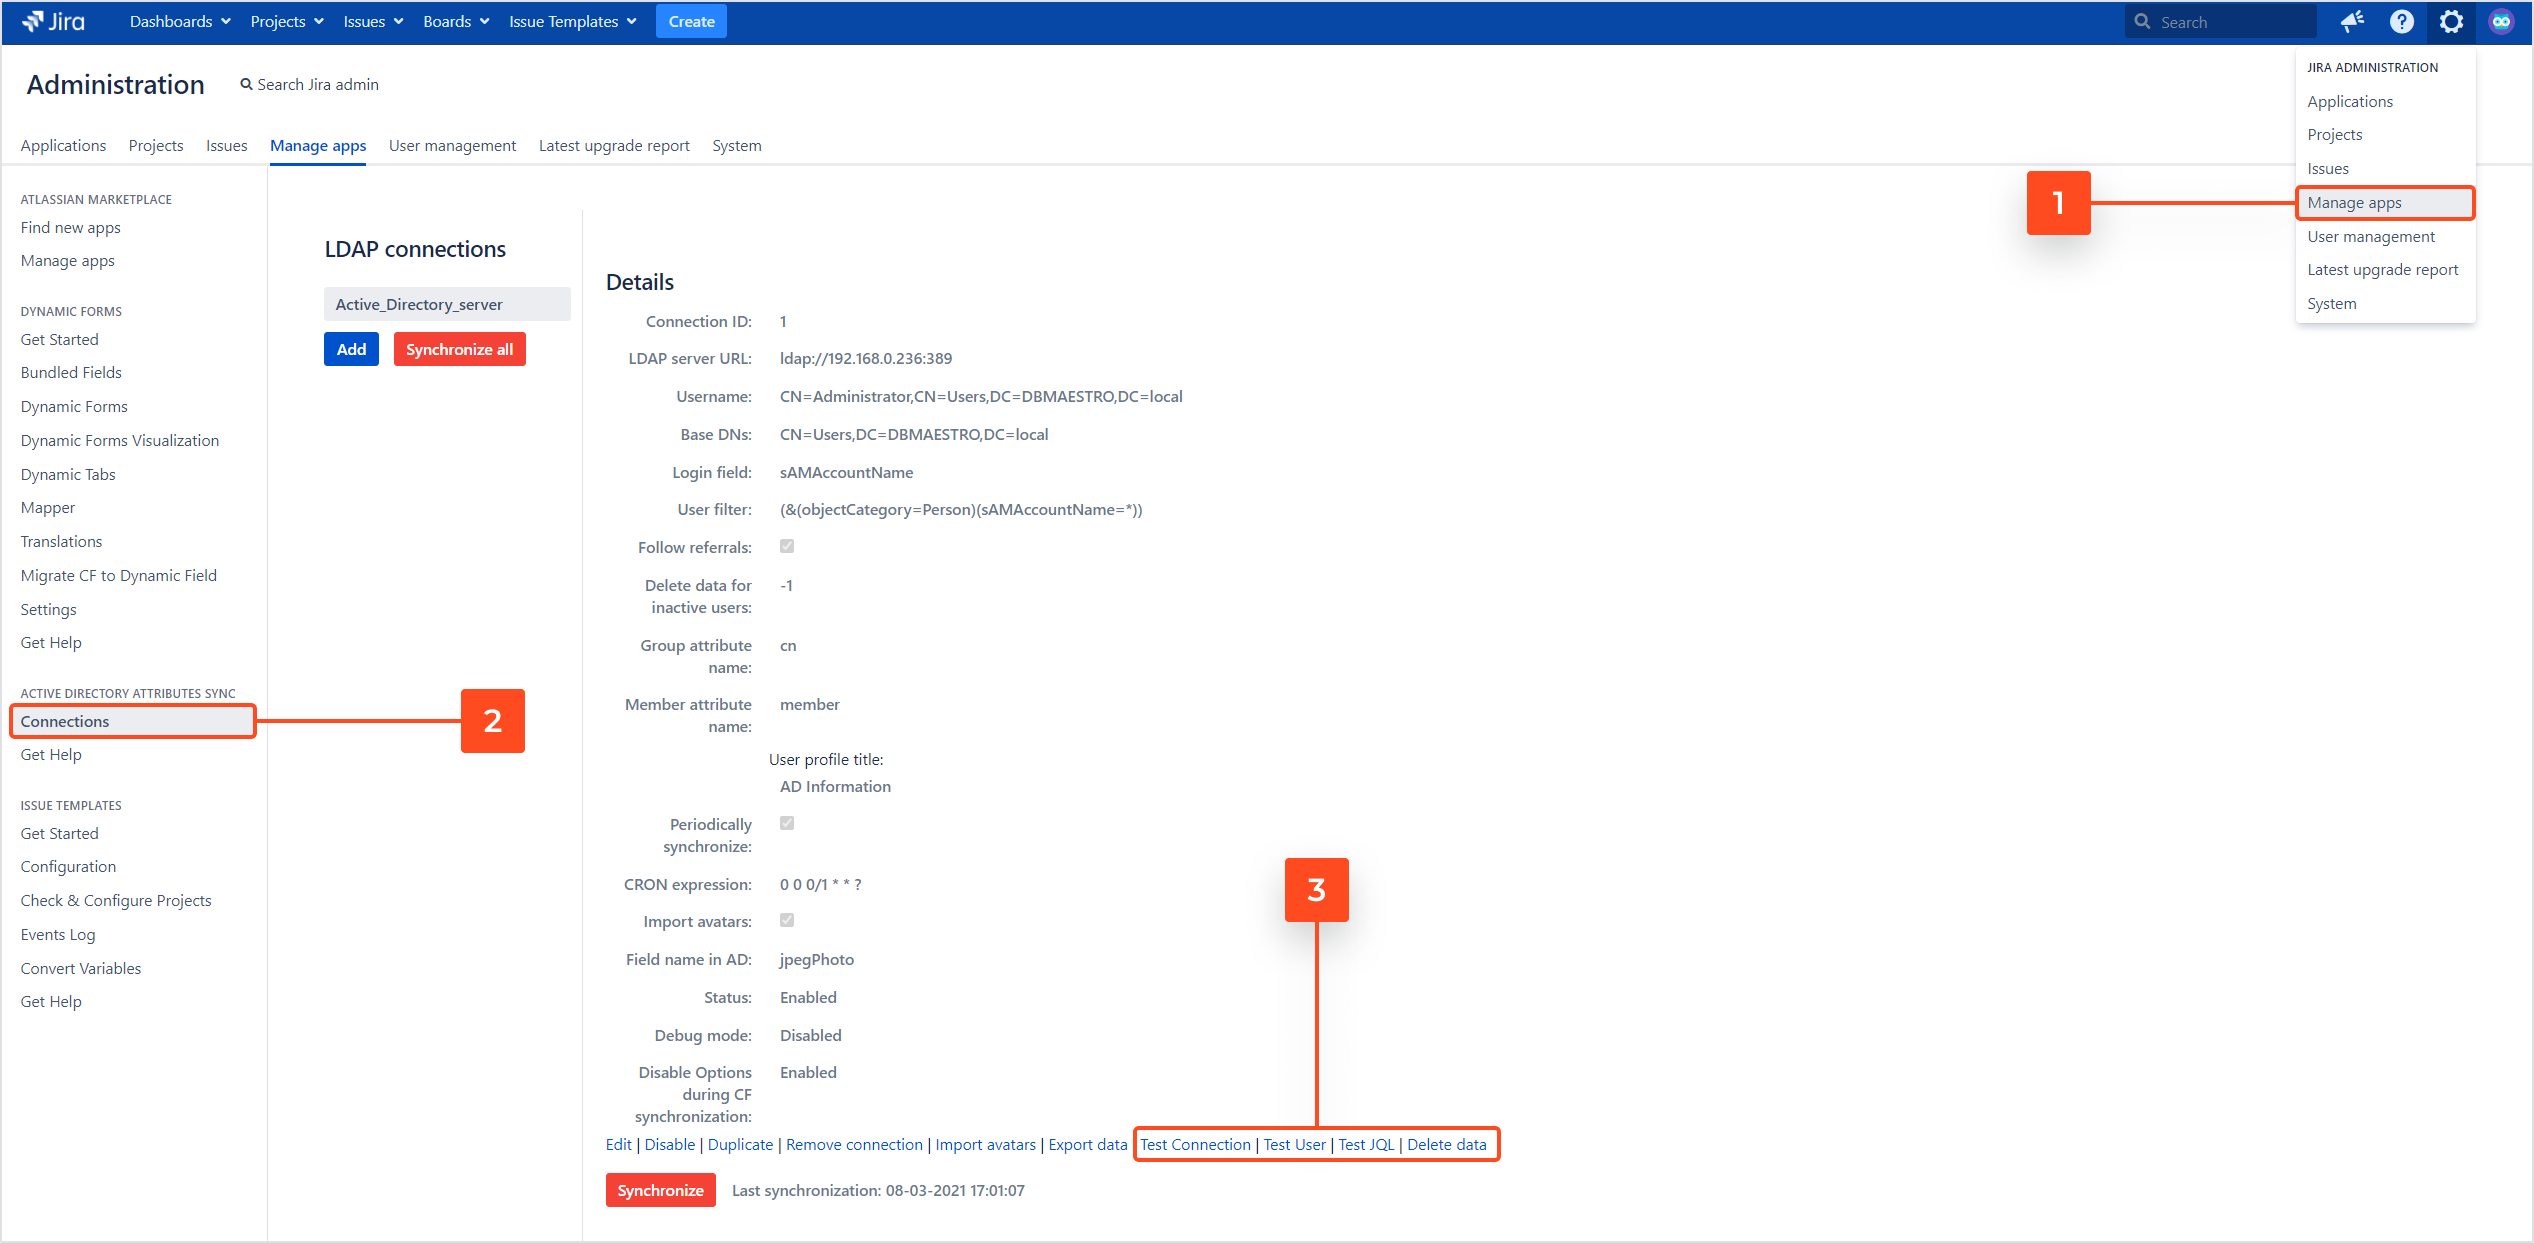 Active Directory Attributes Sync for Jira - Troubleshooting options